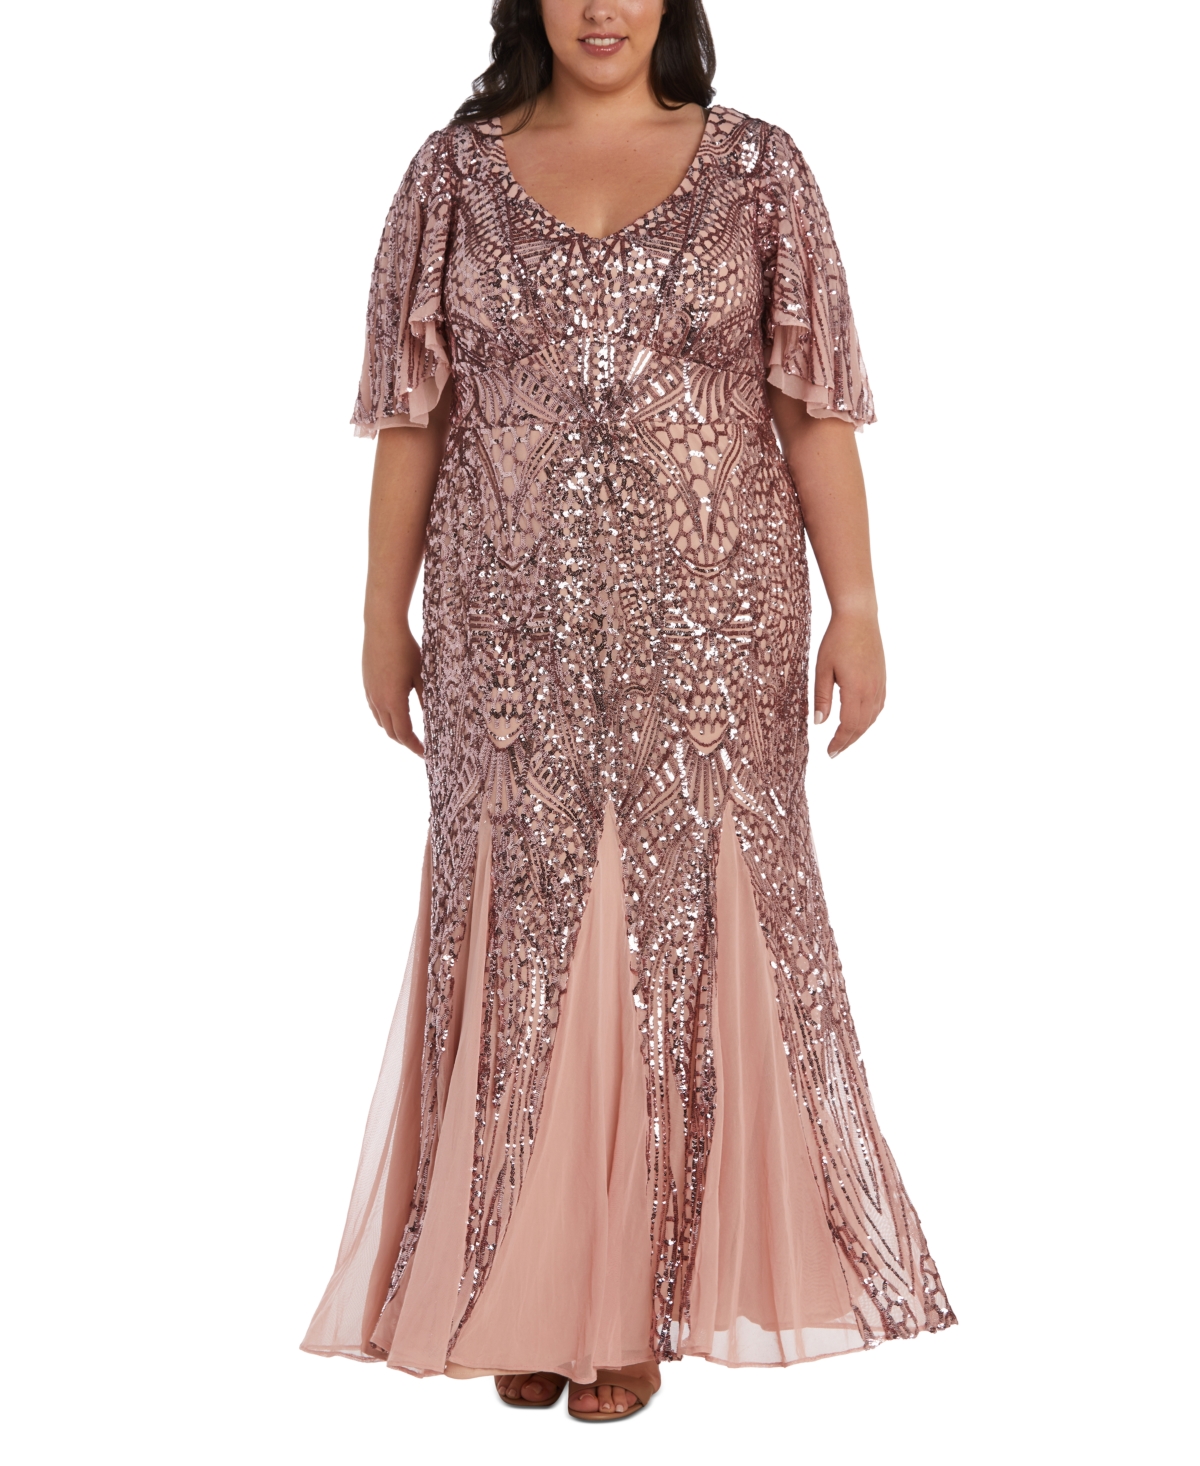 Best 1920s Prom Dresses – Great Gatsby Style Gowns Nightway Plus Size Sequin Flutter-Sleeve Godet Gown - Mauve $209.00 AT vintagedancer.com